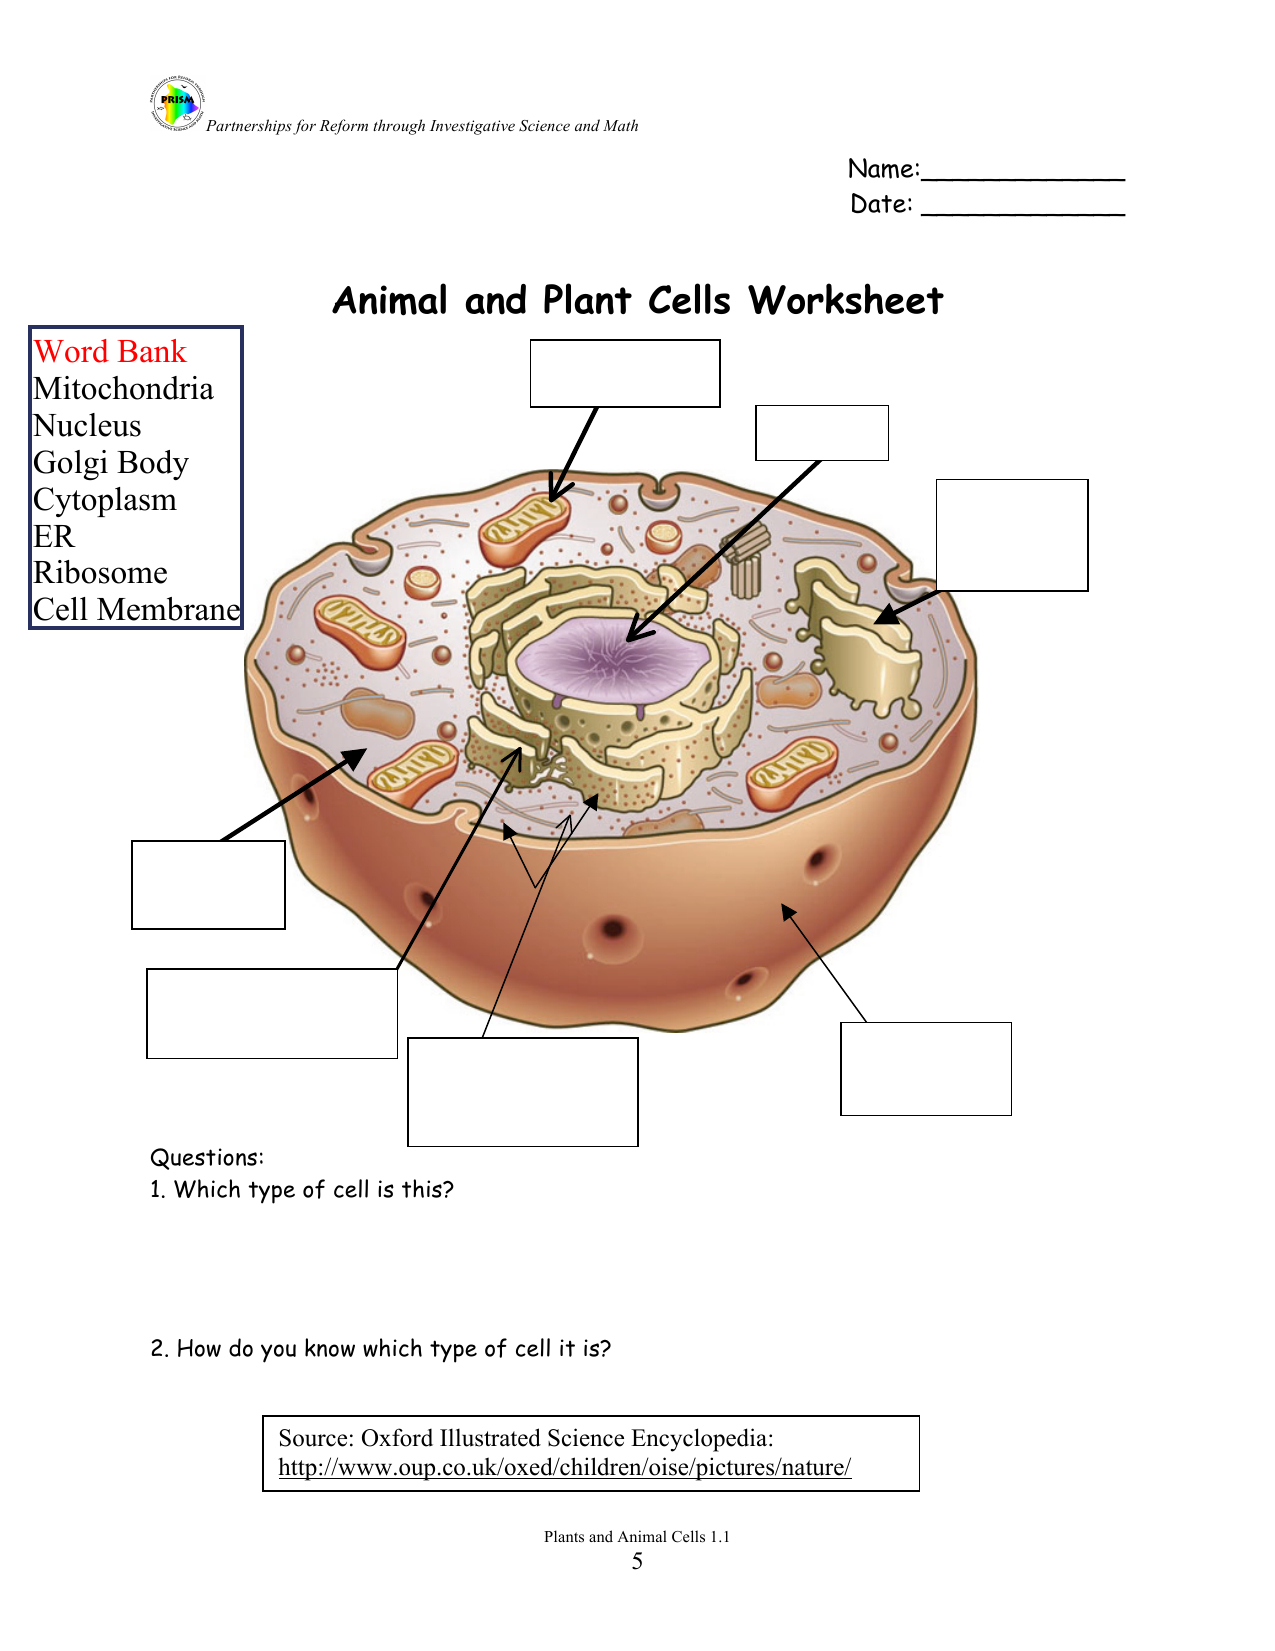 animal-and-plant-cells-worksheet-answers-db-excel